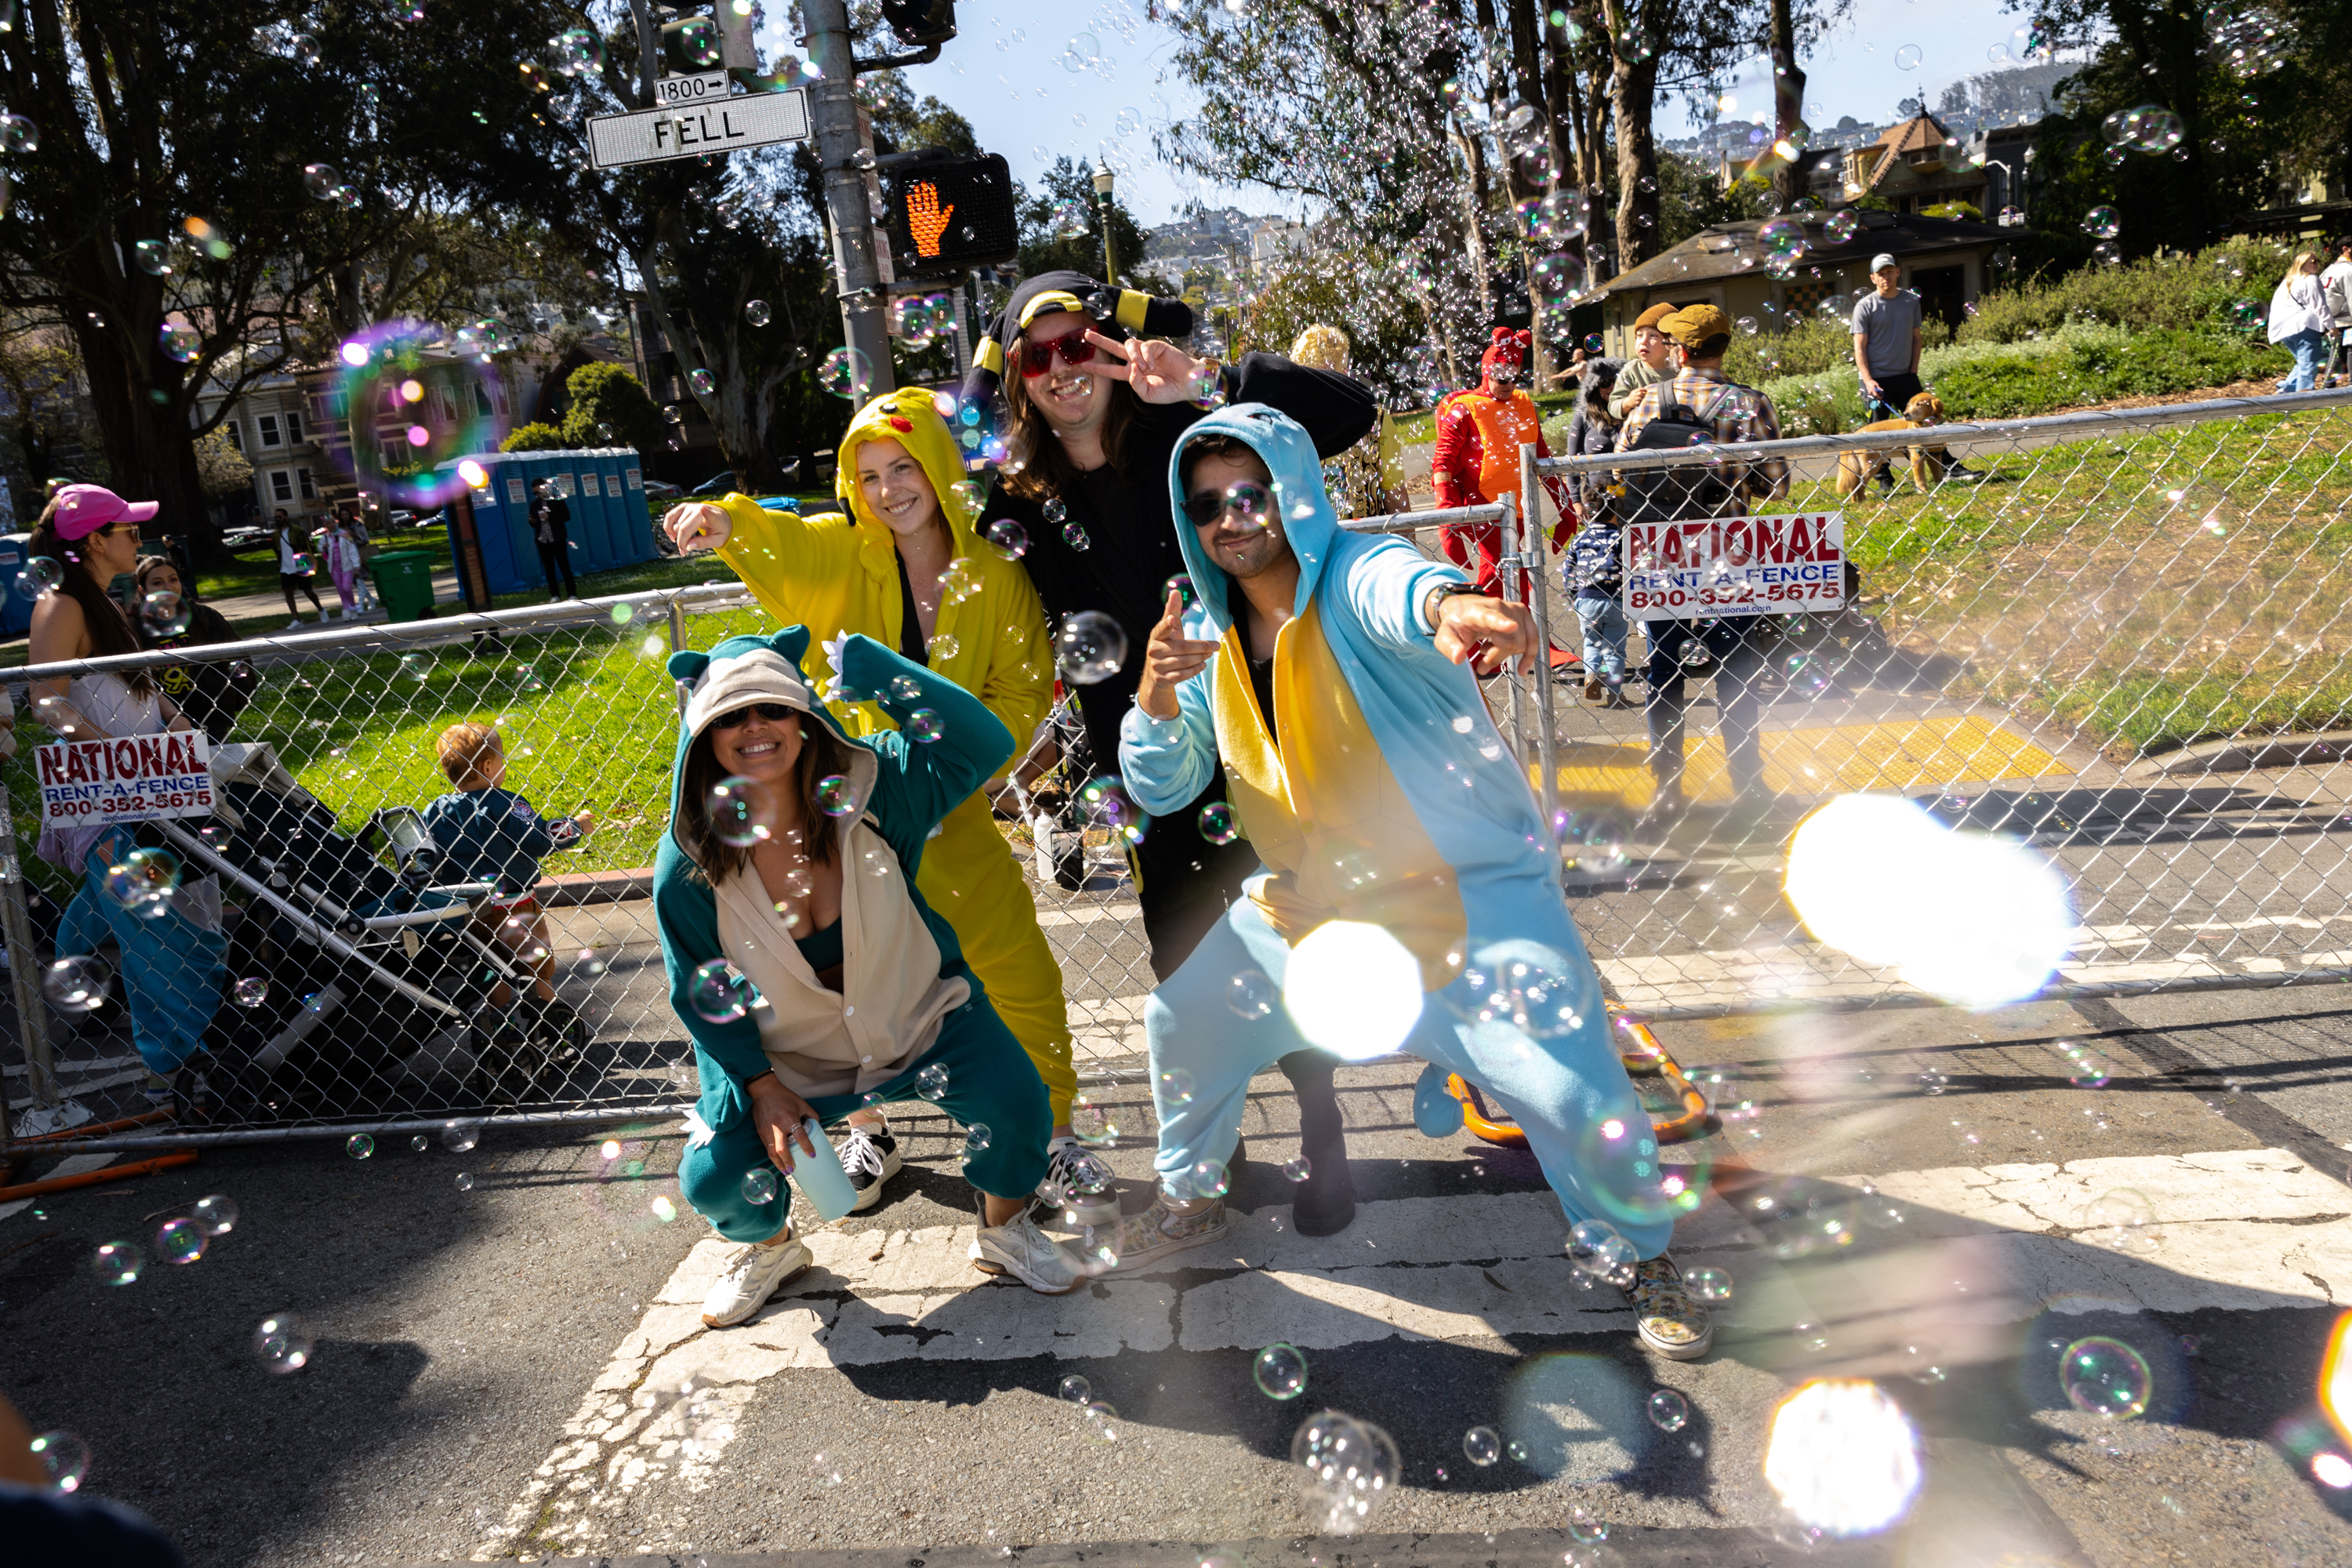 Four joyful people in animal onesies play with bubbles on a sunny street corner, surrounded by colorful floating bubbles and greenery.